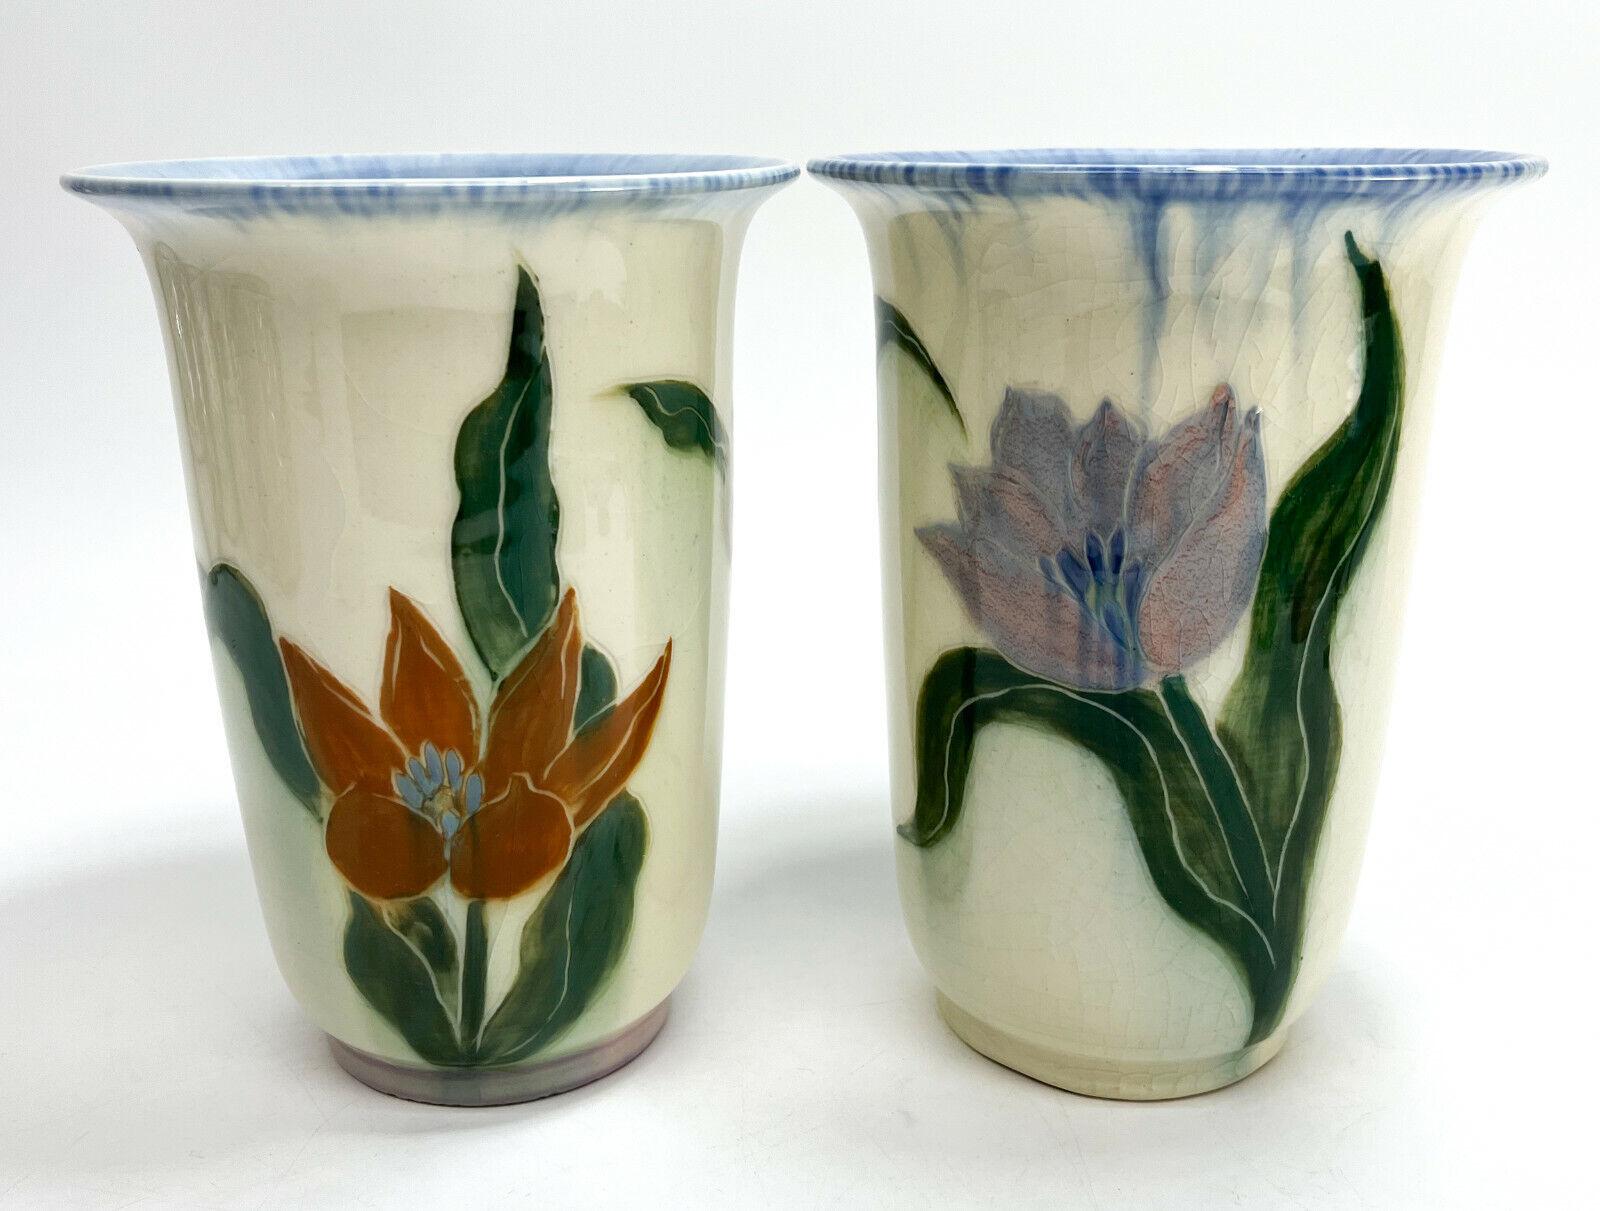 Pair of Rookwood Pottery Vases by E.T. Hurley #6806, Hand Painted Tulips, 1943 In Good Condition For Sale In Gardena, CA